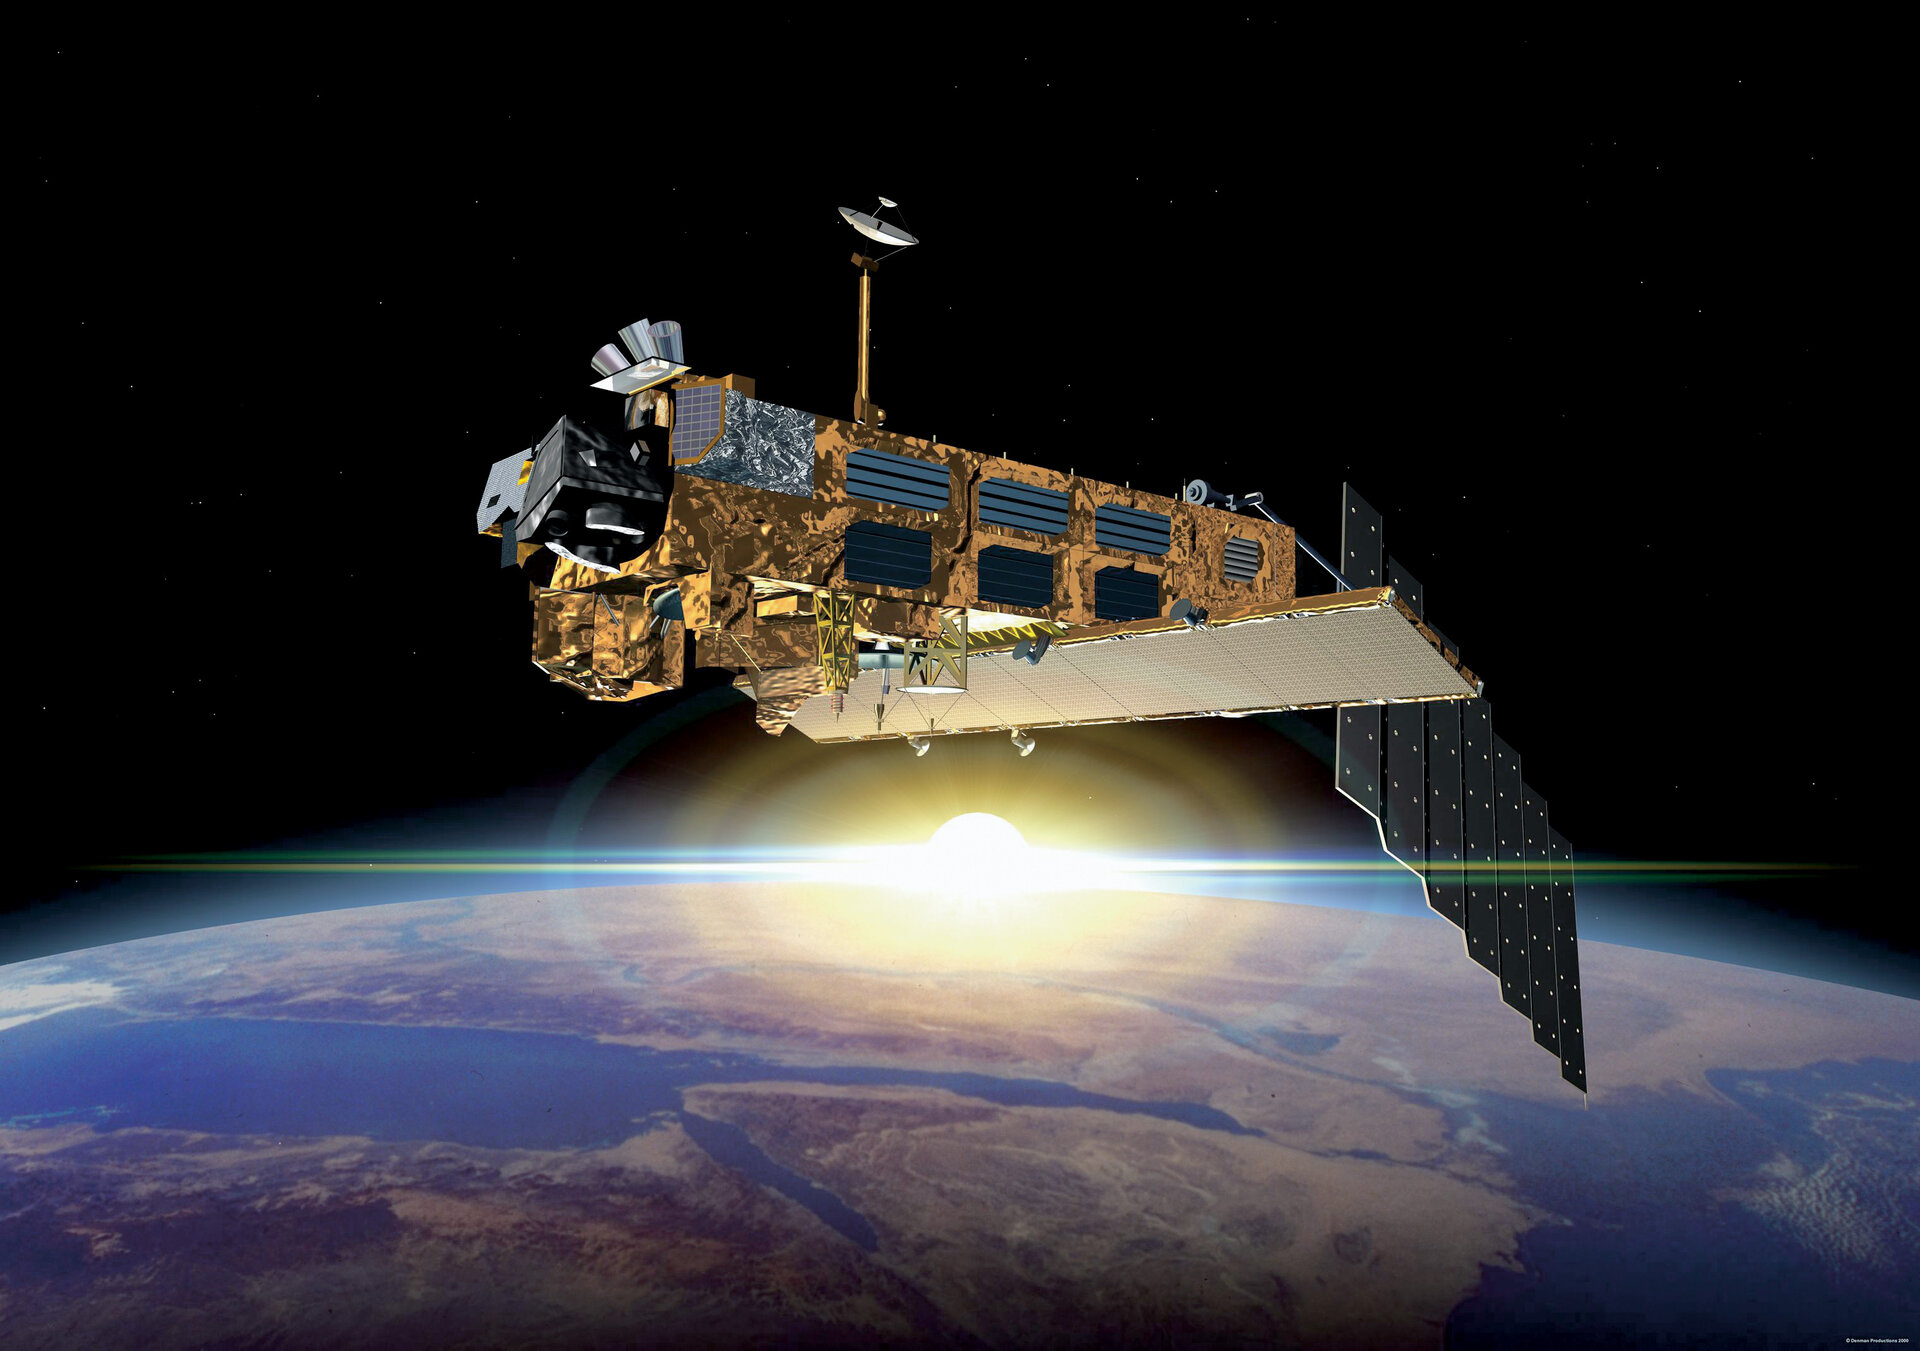 Data from the Envisat satellite was used in the demonstration phase of the project